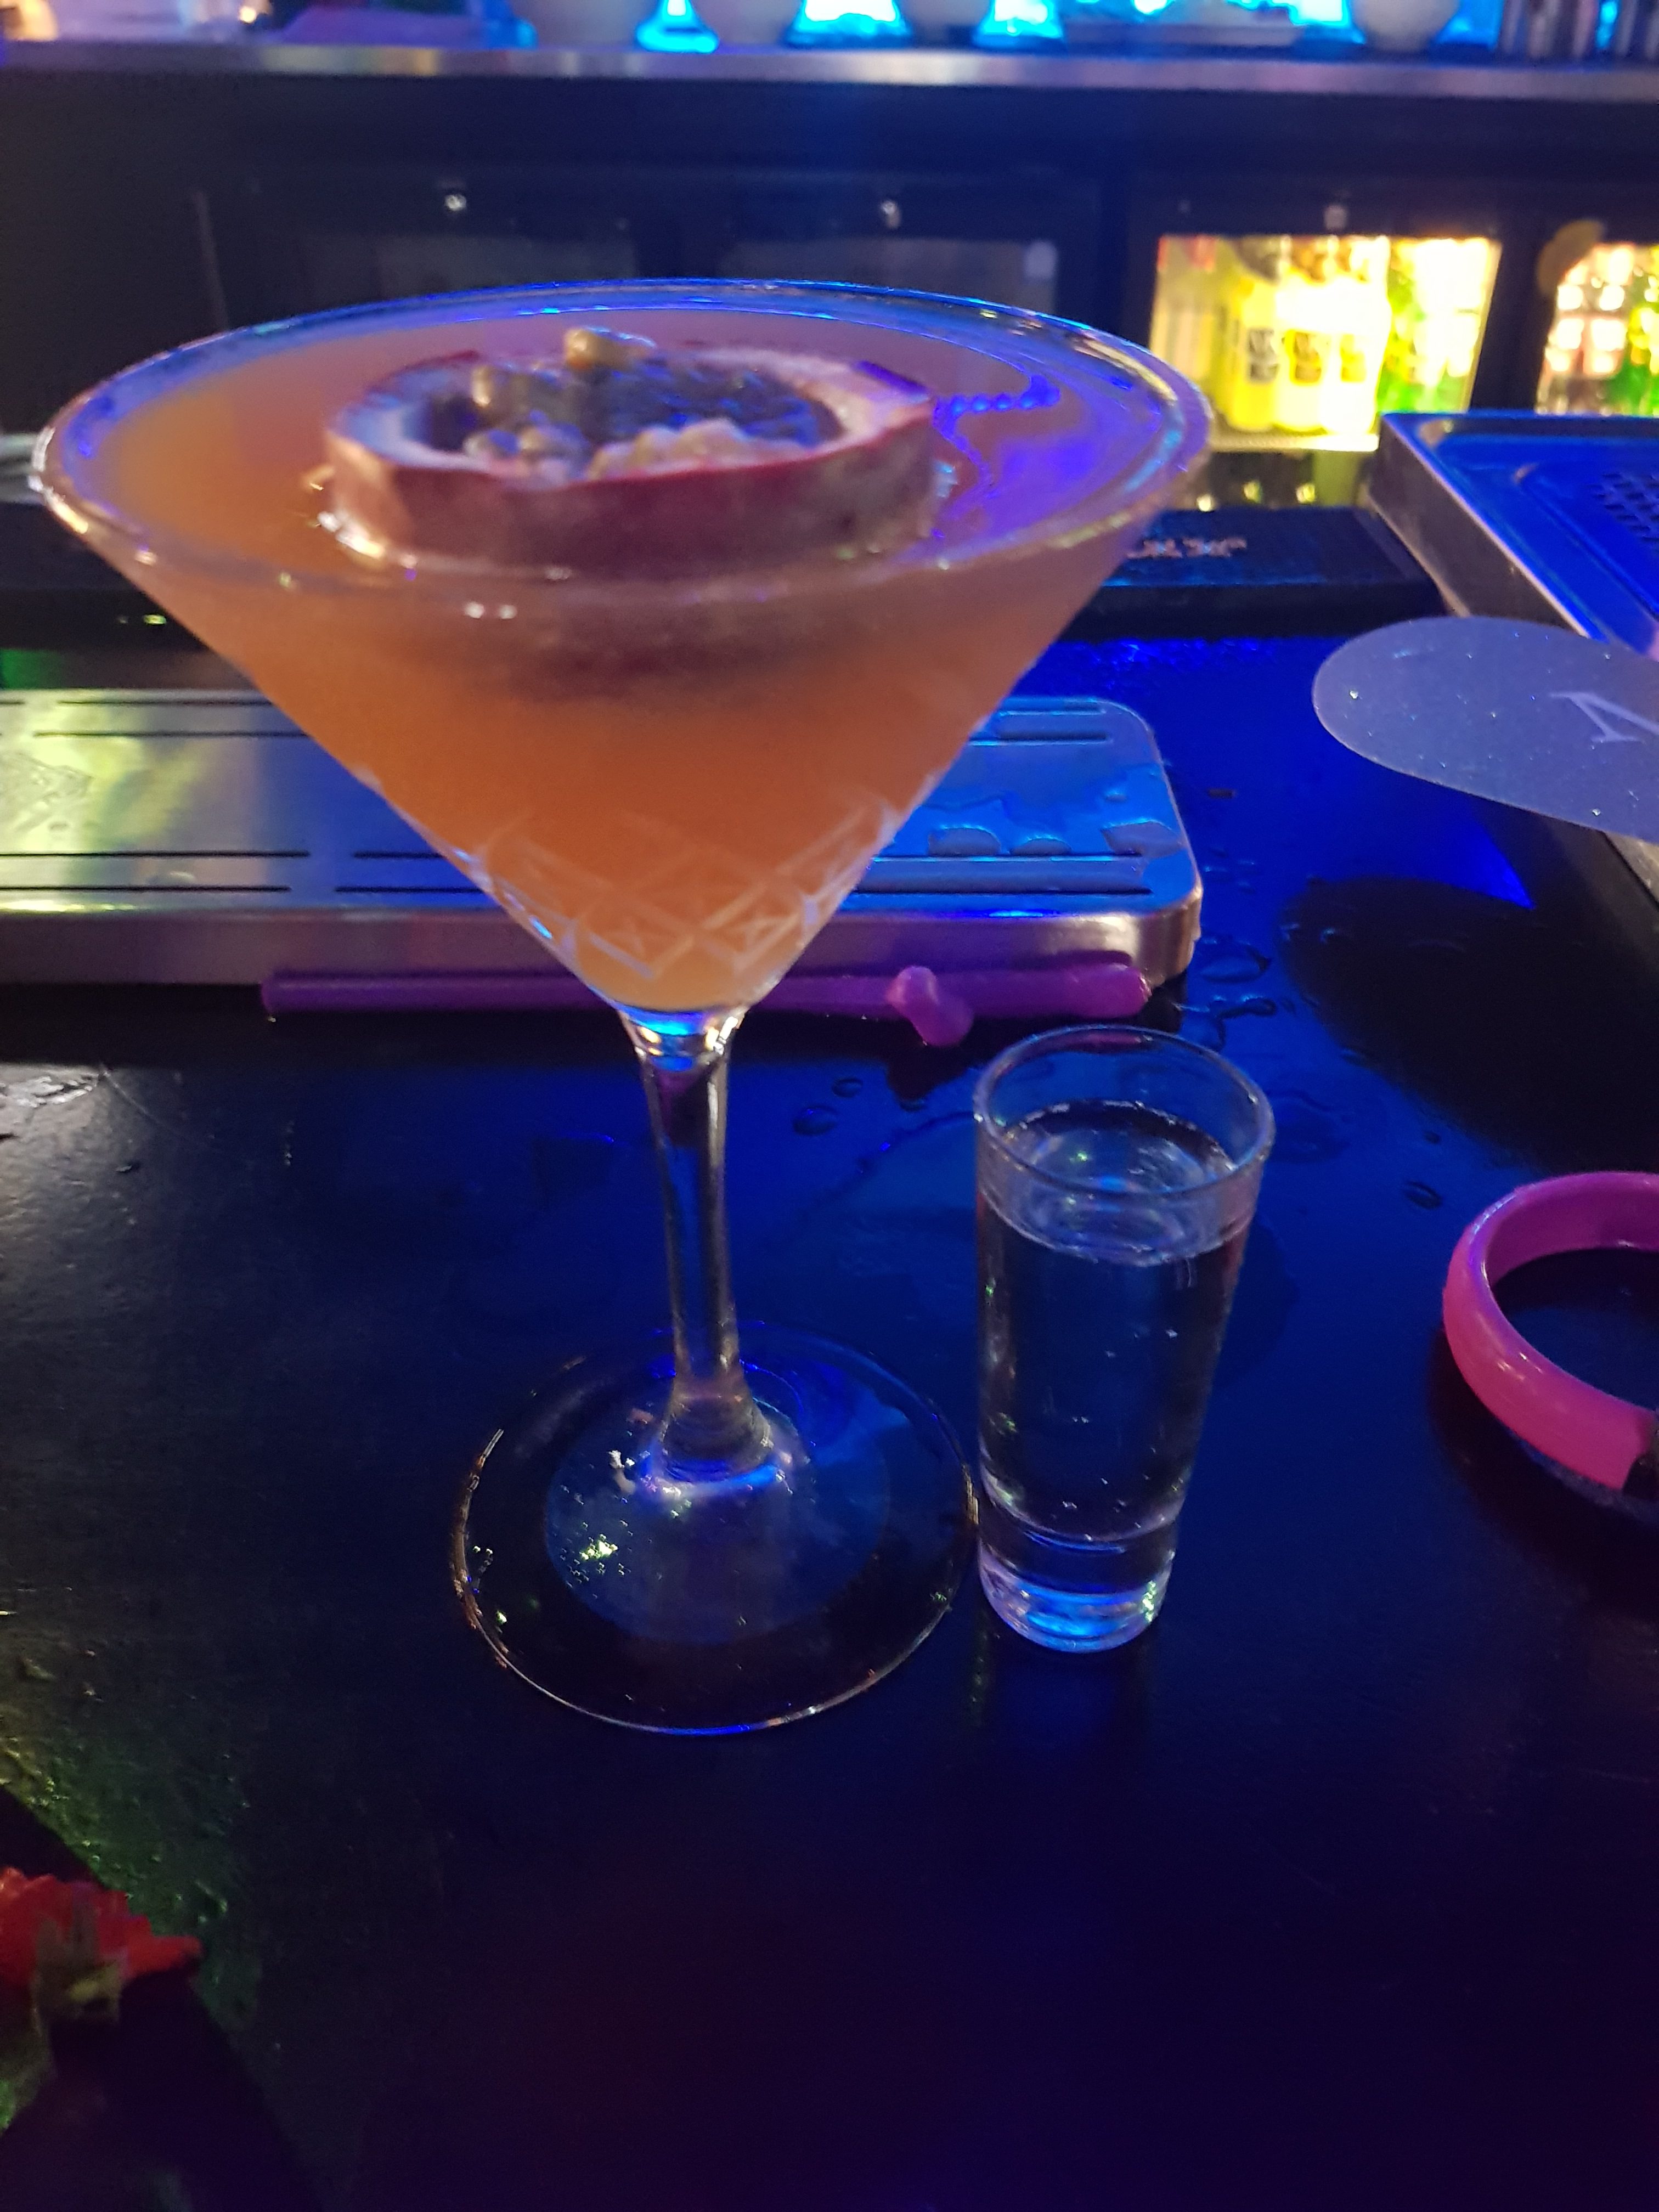 Porn star martini at andwhynot Mansfield. Orange drink served in a martini glass with half a passion fruit and a shot of prosecco